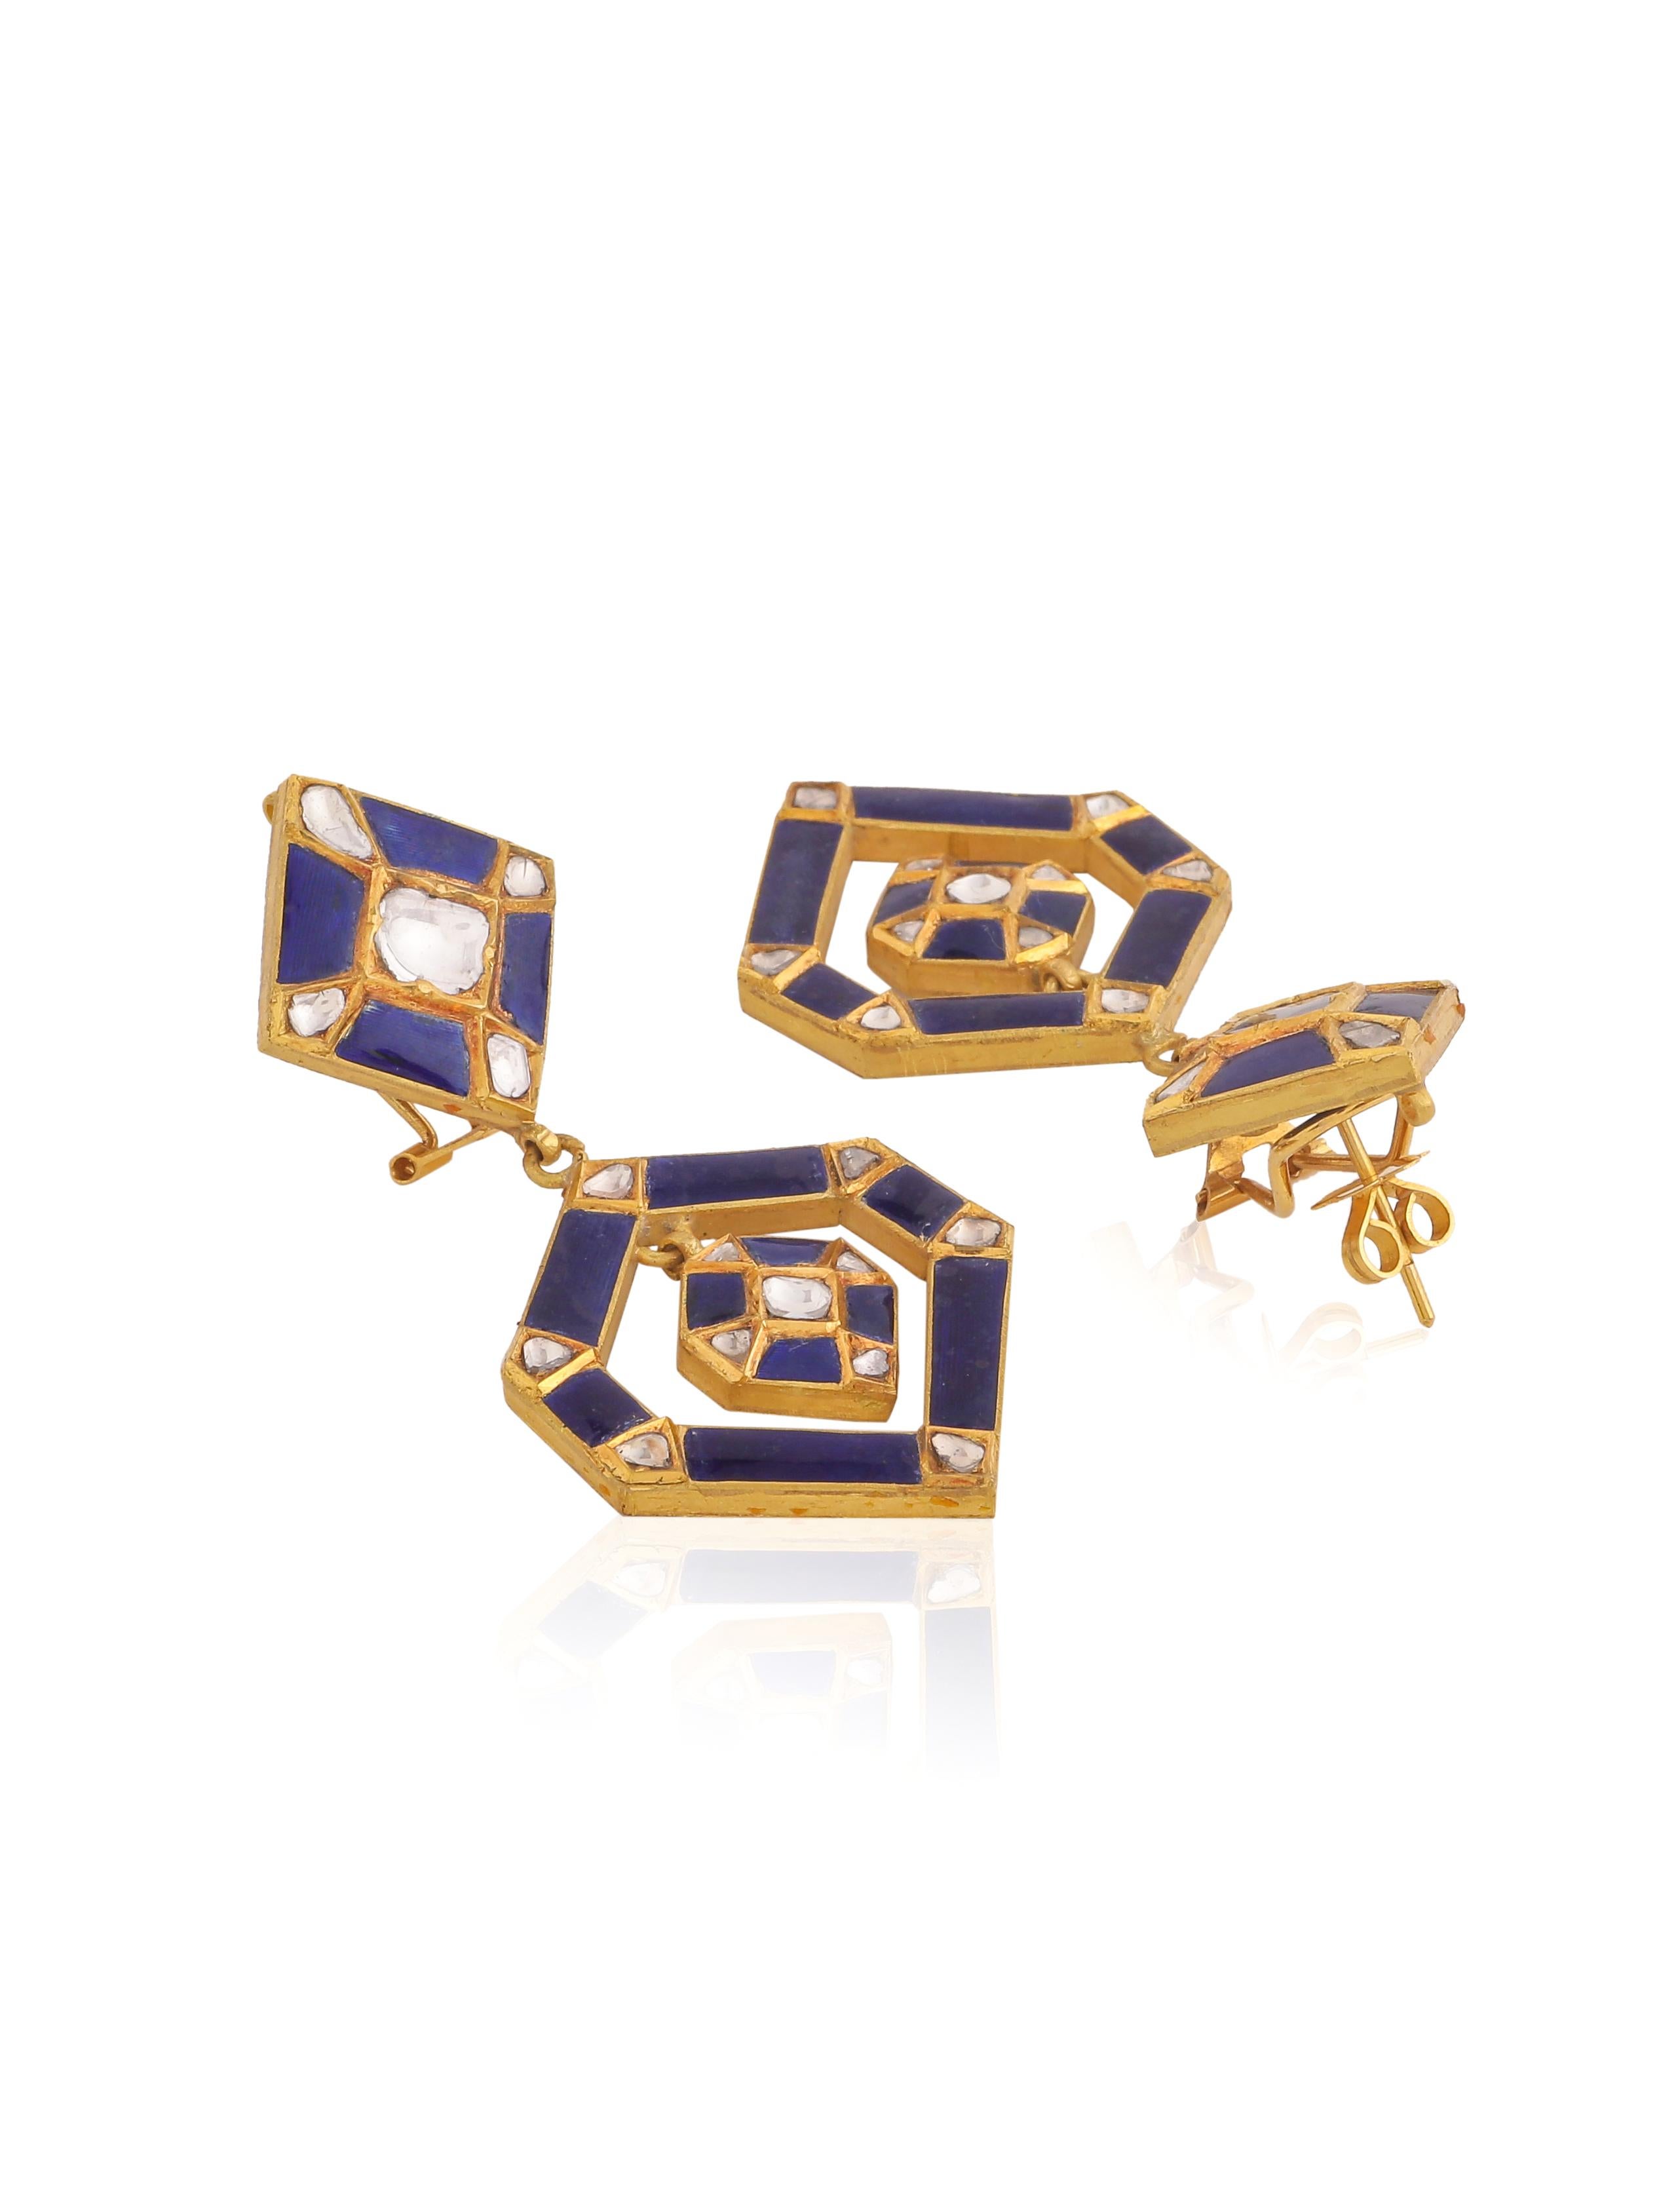 A pair of stunning geometrical earrings handcrafted in 18K Gold with flat diamonds.
These special flat diamonds Diamonds are called 